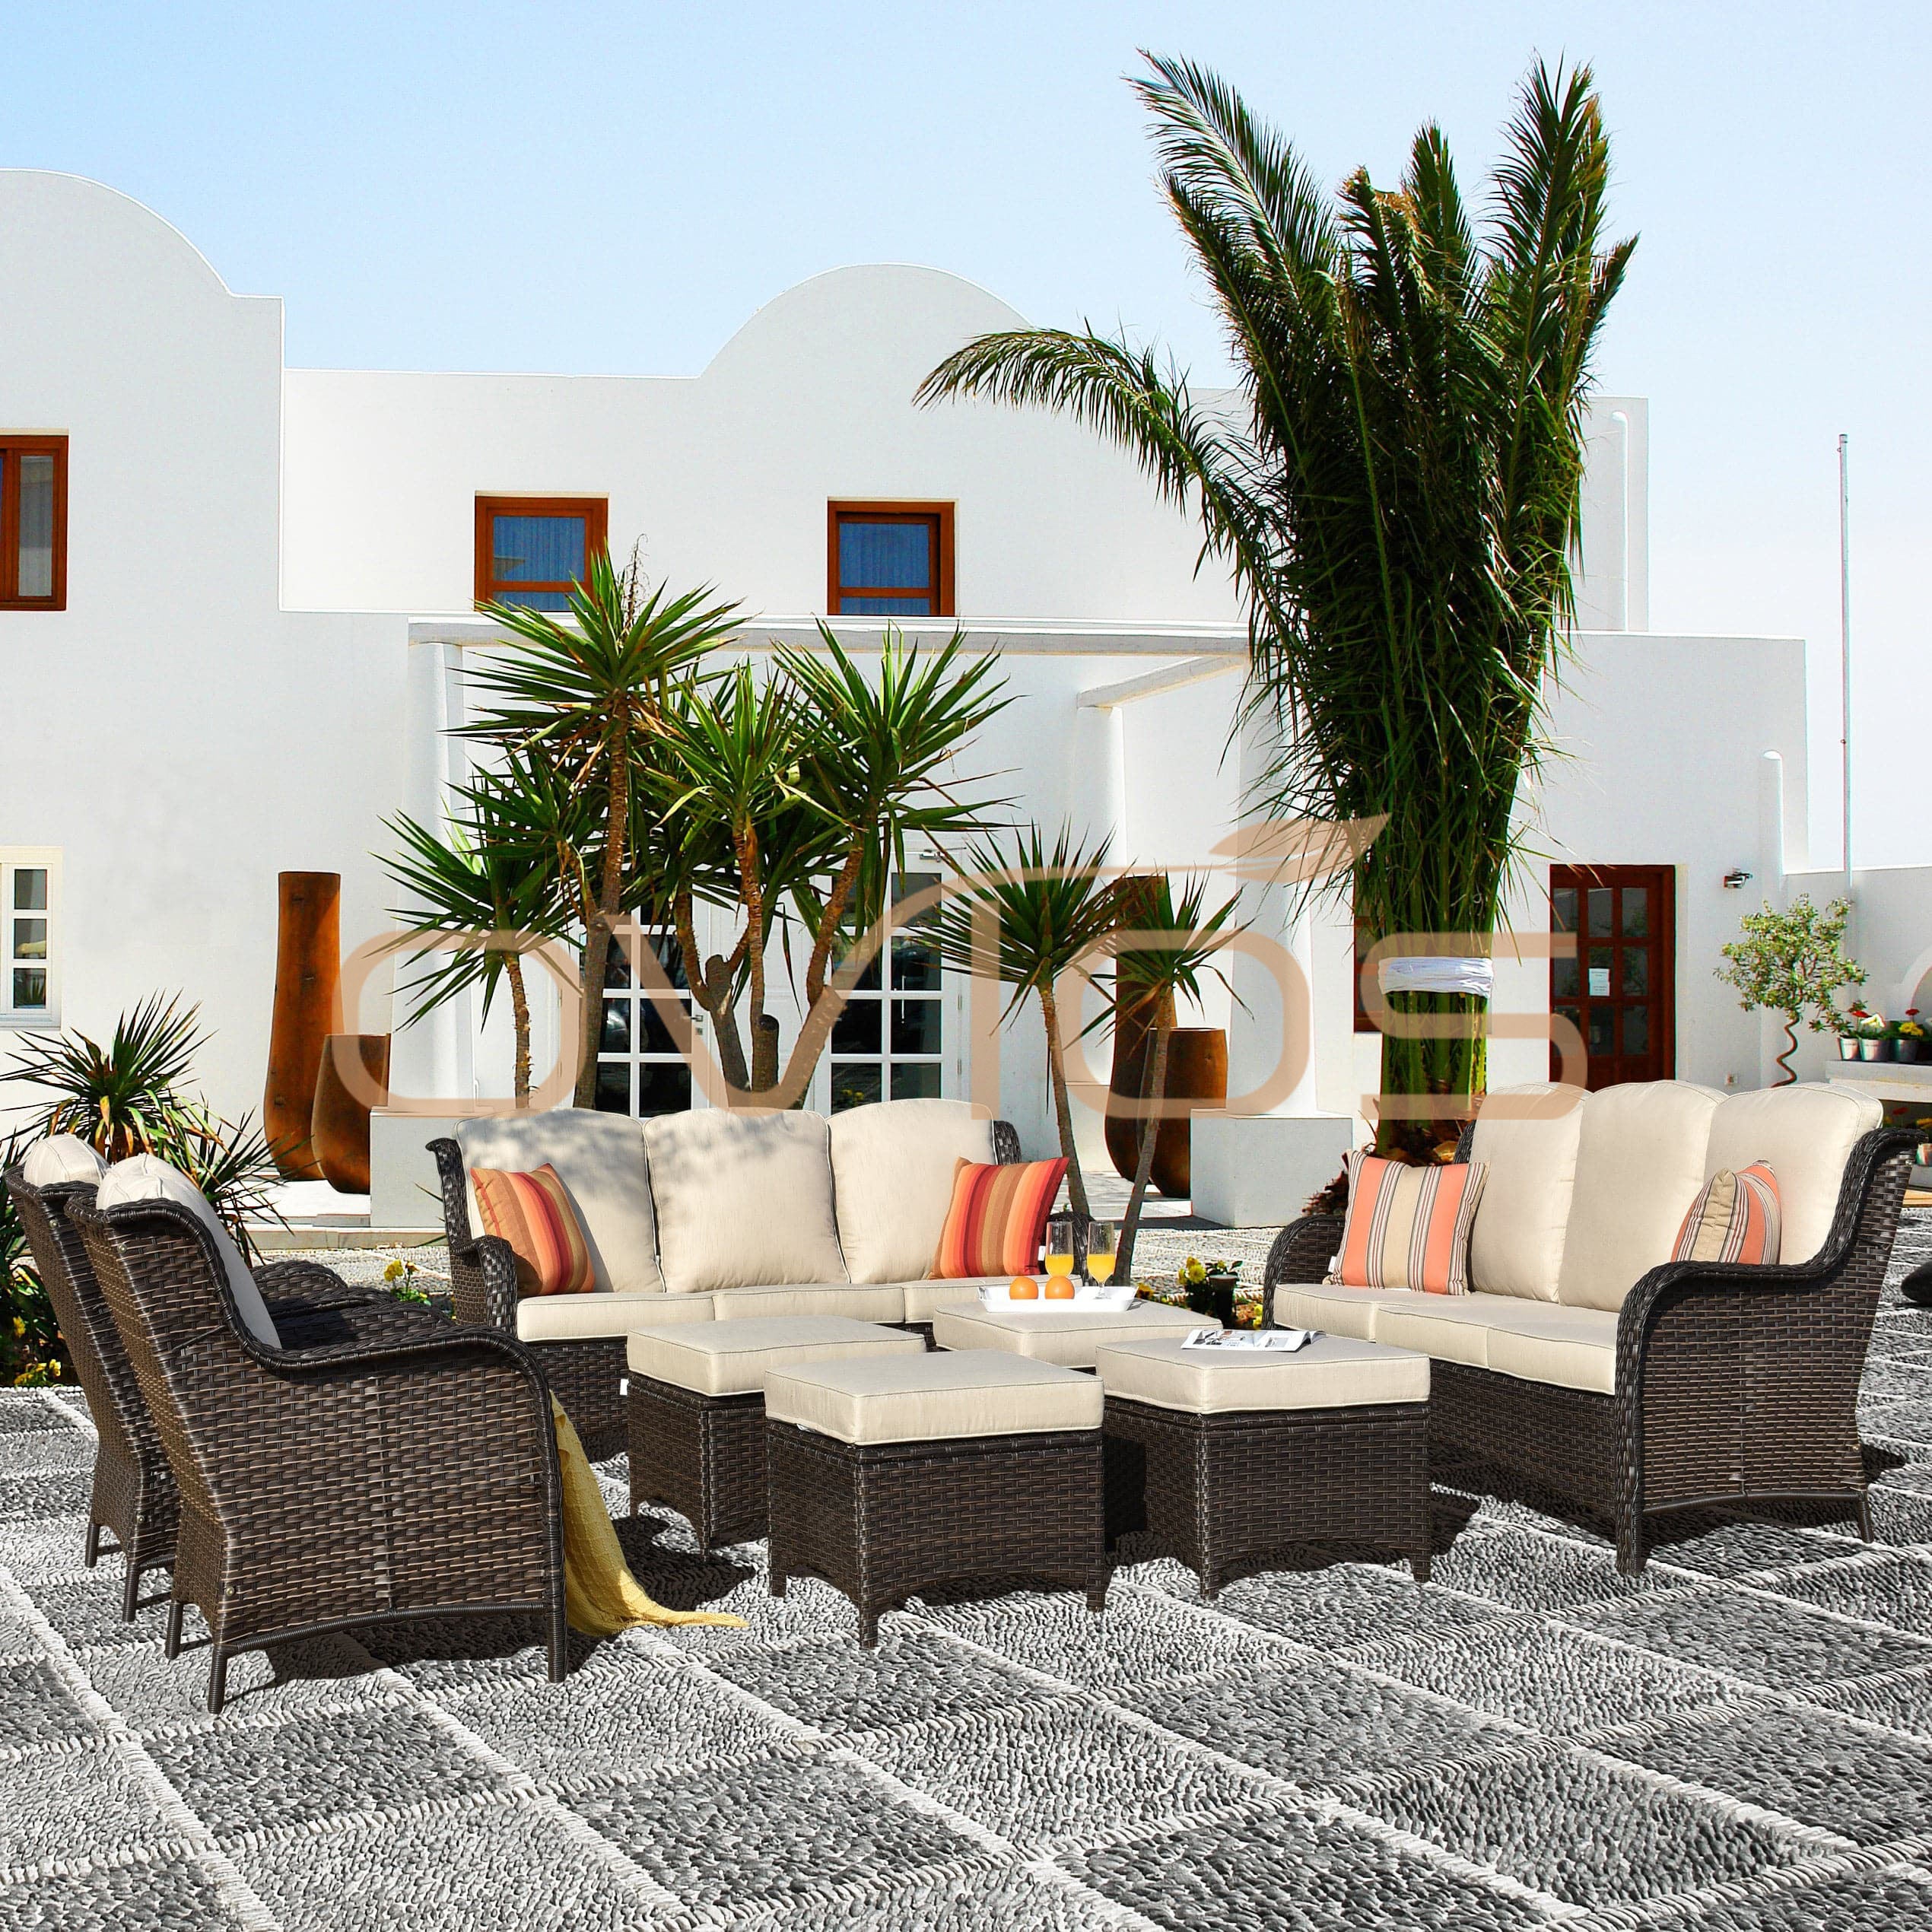 Complete Buying Guide: How to Choose the Perfect Outdoor Sofa